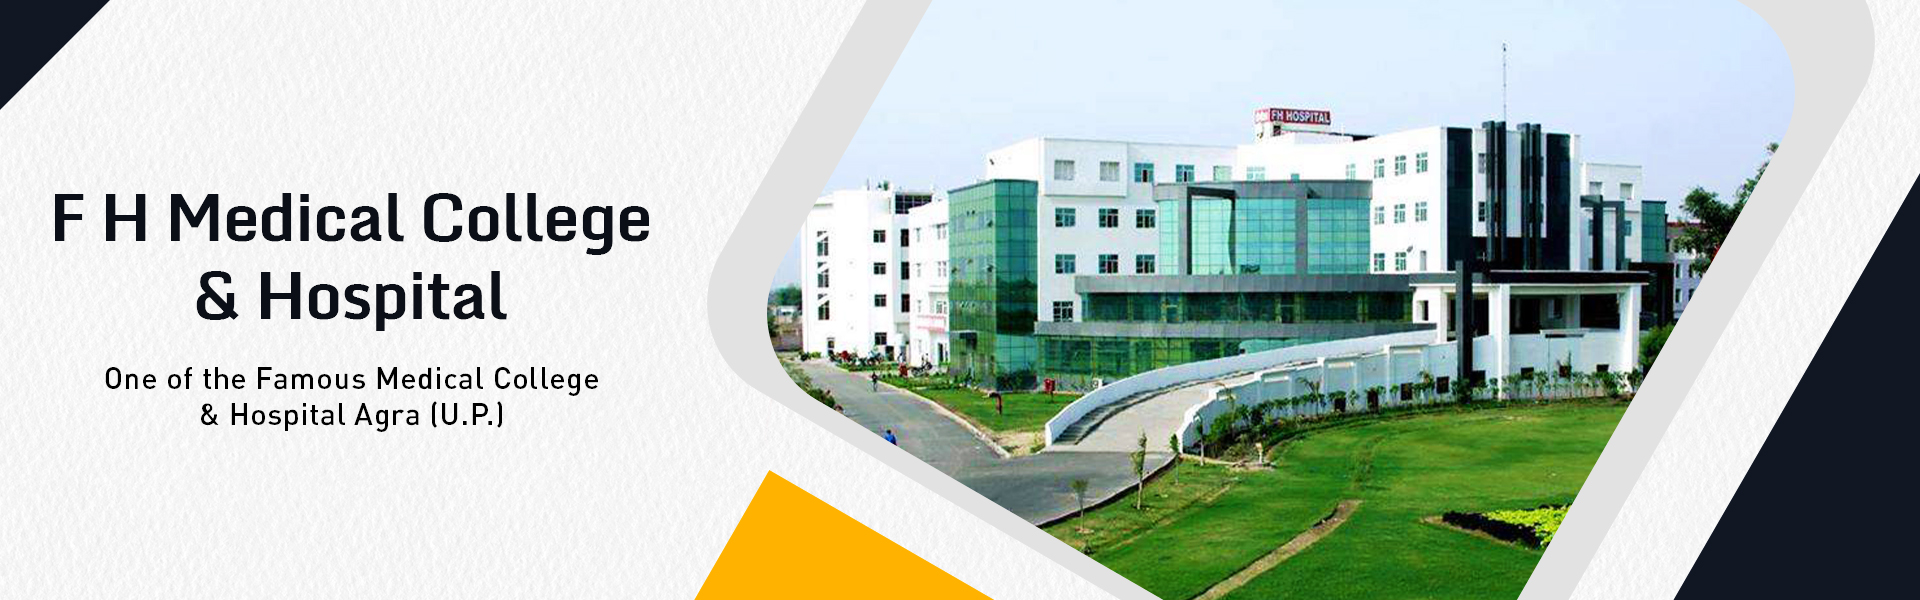 FH Medical College Agra 2022-23: Admission, Fees Structure, Courses Offered, Cutoff, Counselling , Contact Details